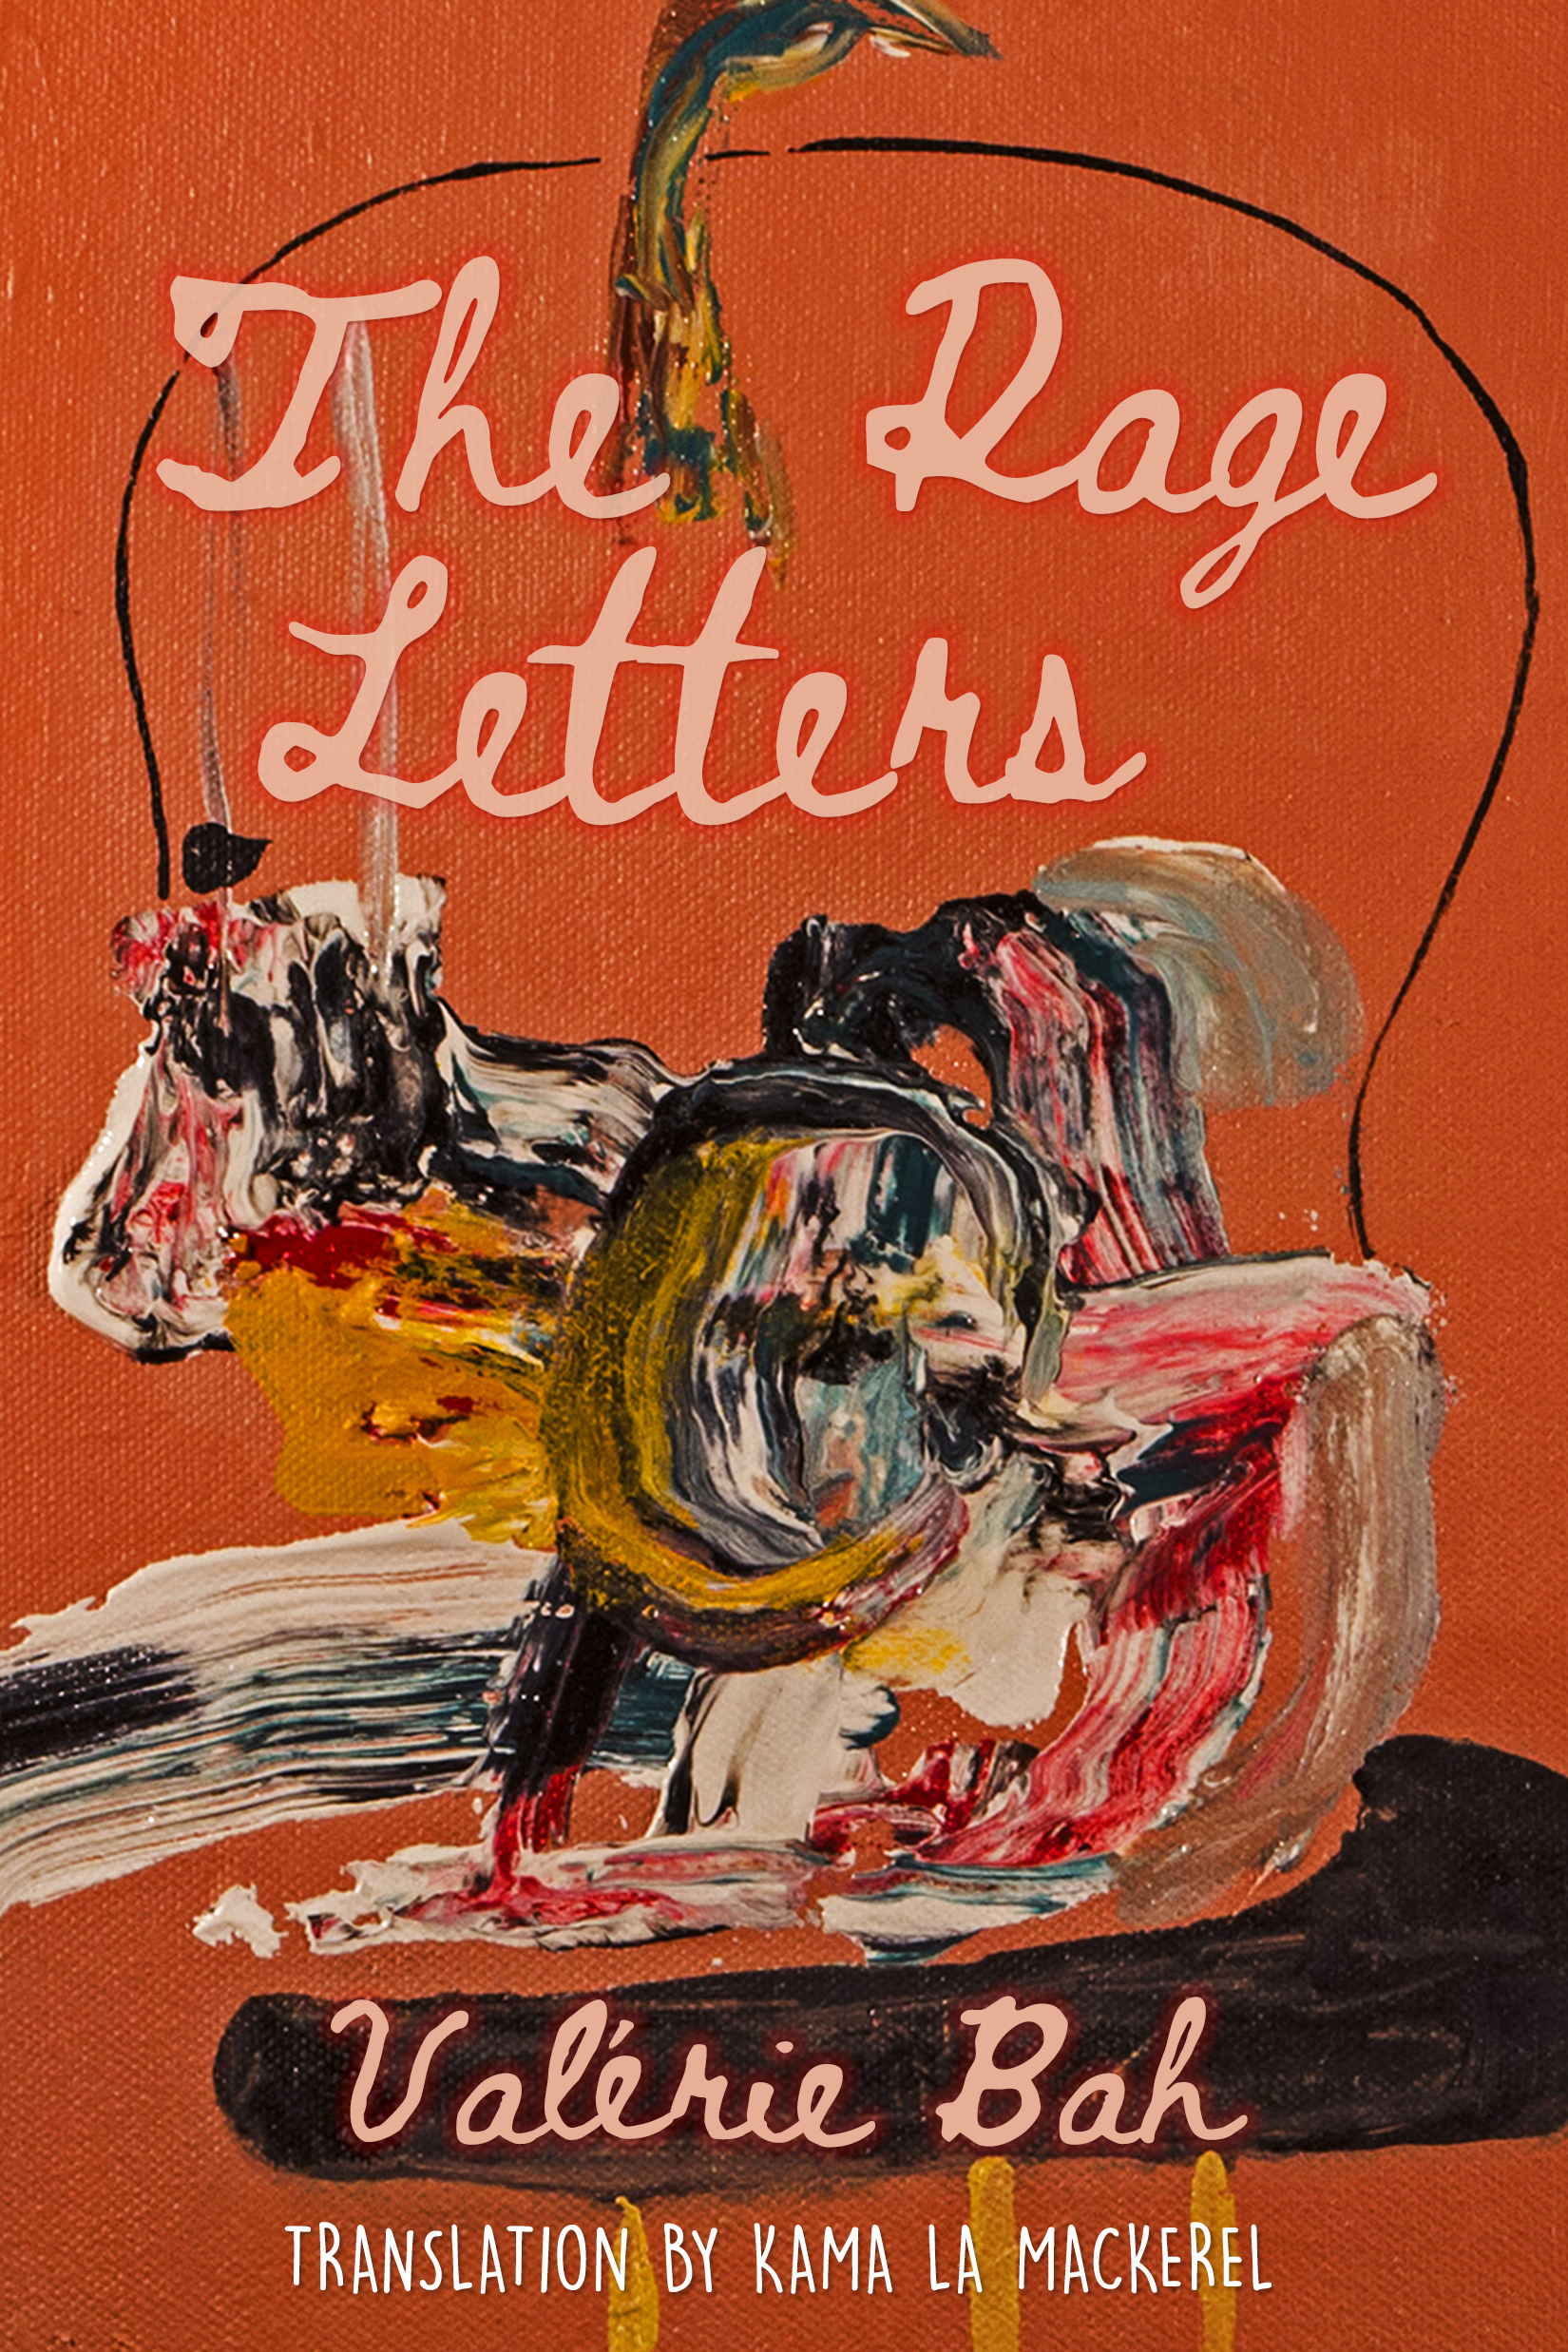 The cover of The Rage Letters by Valerie Bah, translated by Kama La Mackerel 